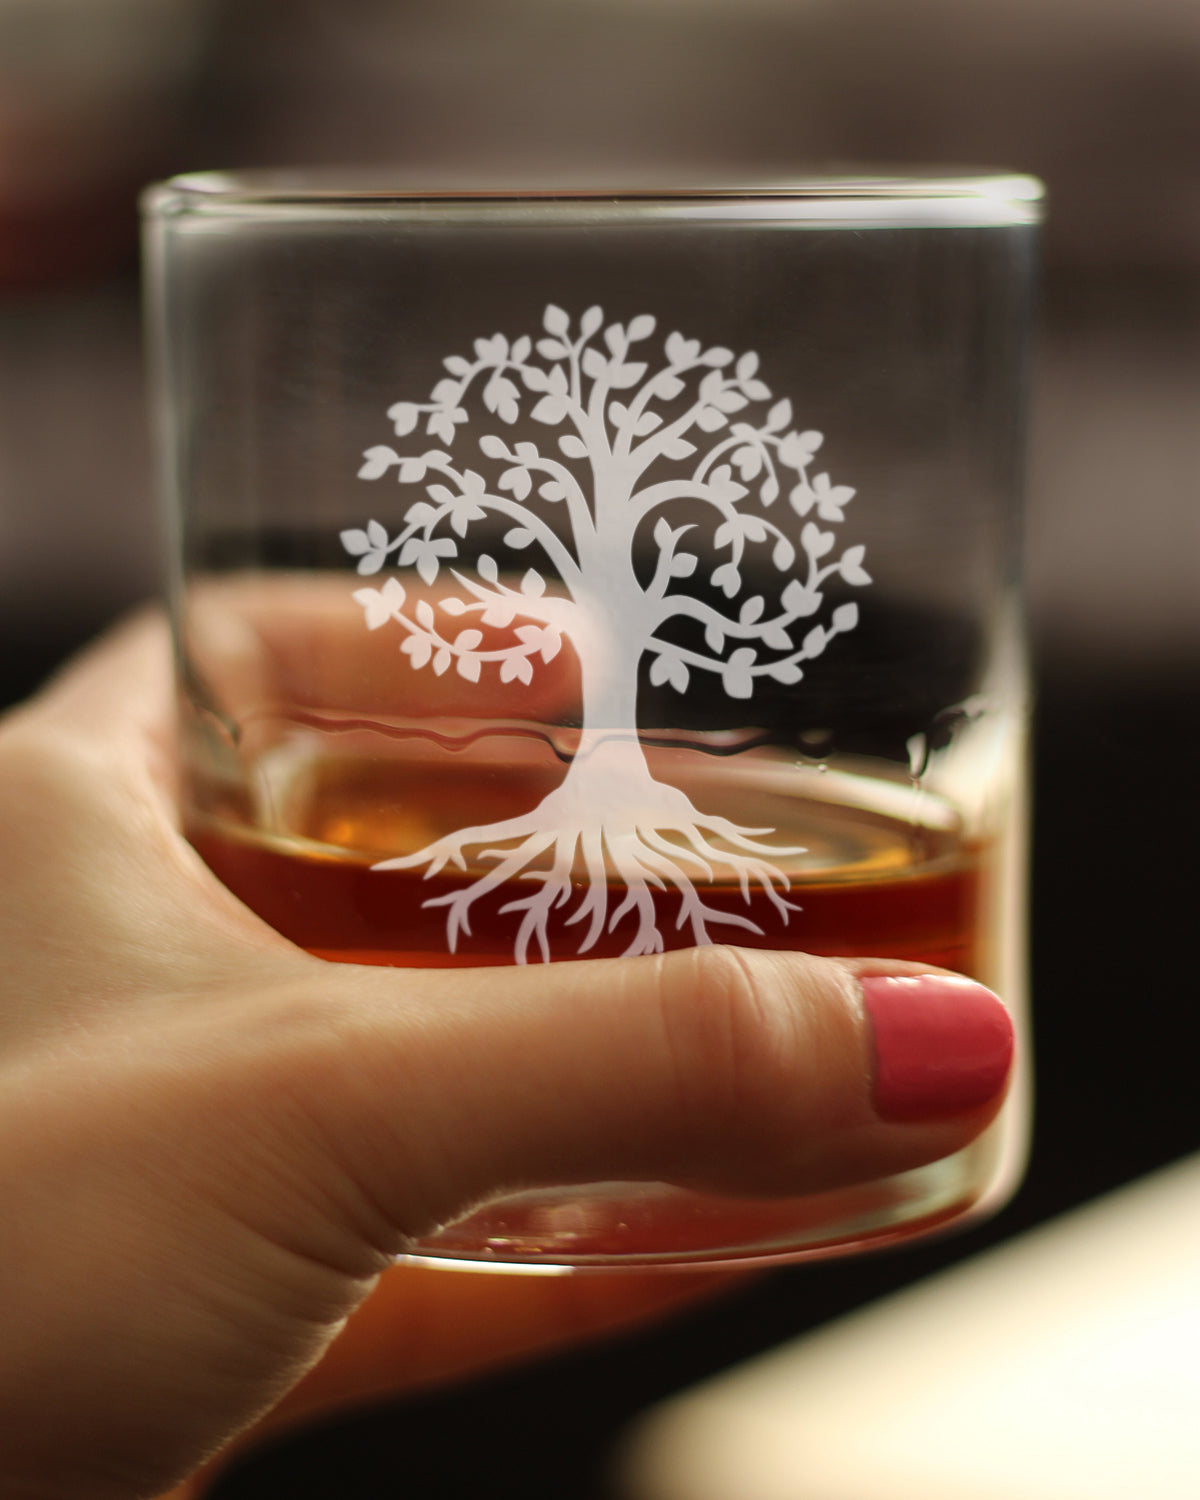 Tree Of Life - Whiskey Rocks Glass - Cute Family Themed Gifts and Decor - 10.25 Oz Glass